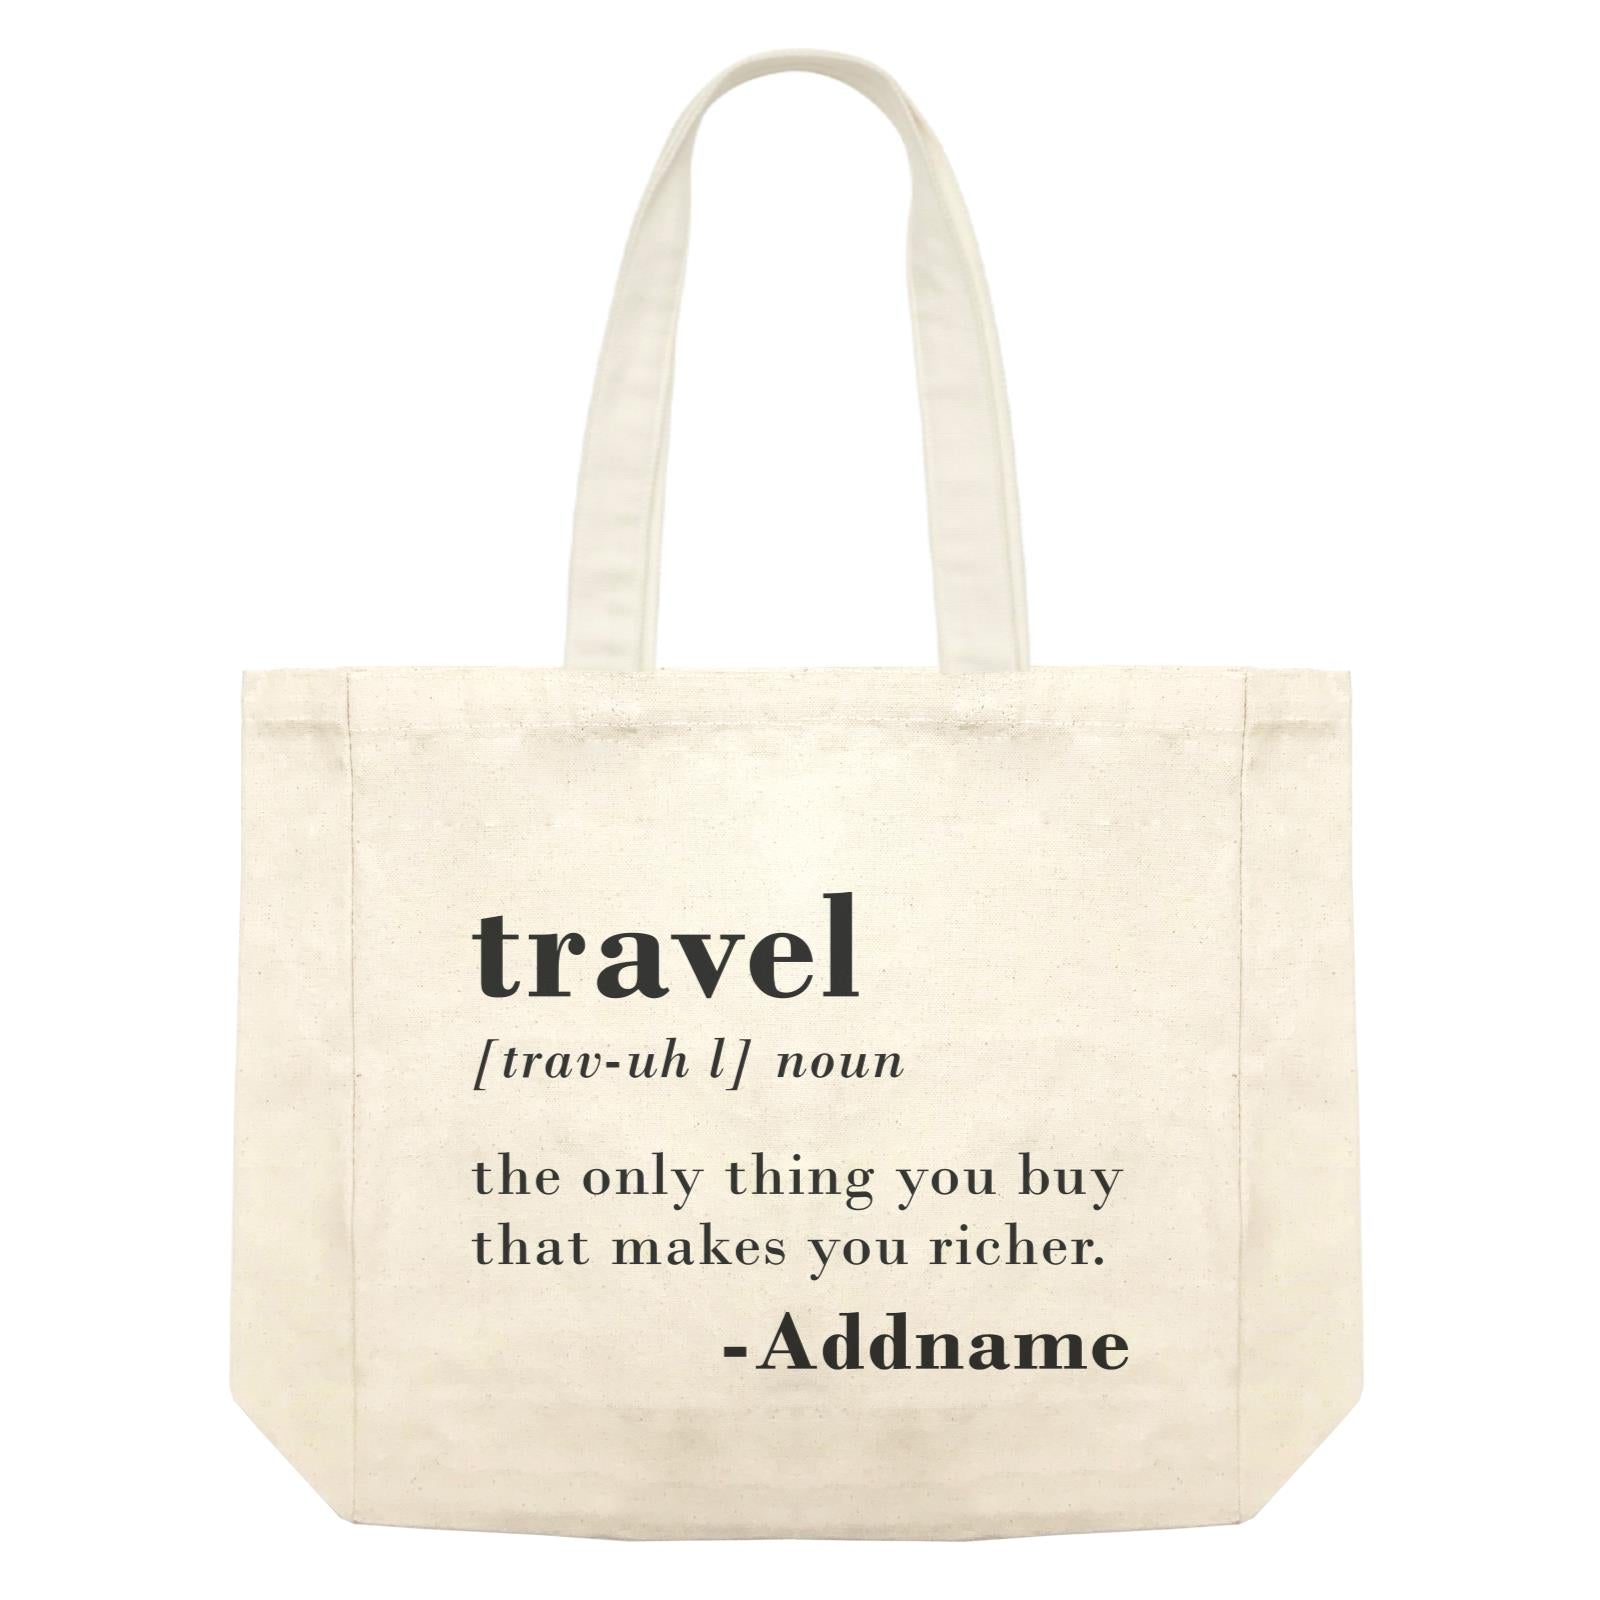 Travel Quotes Travel Noun Meaning Addname Shopping Bag